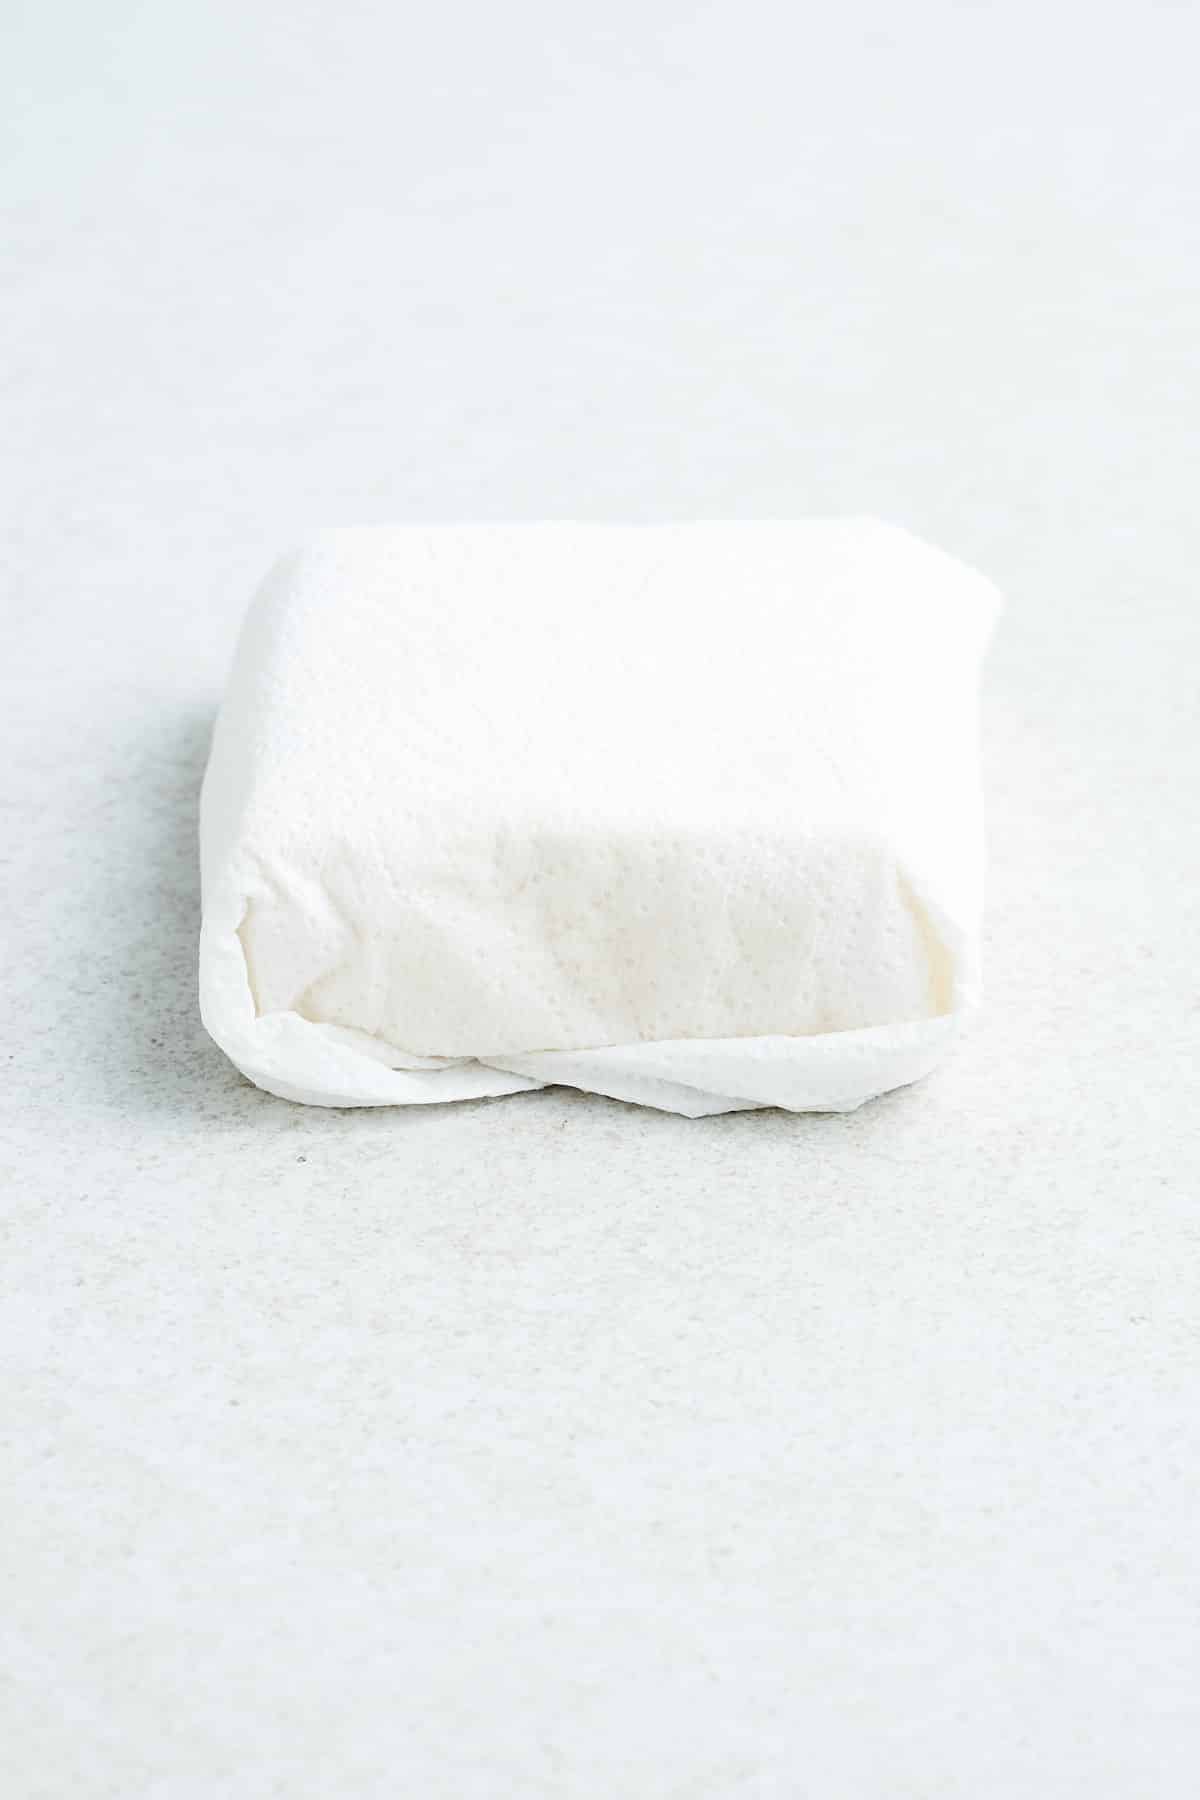 Tofu wrapped in a paper towel.